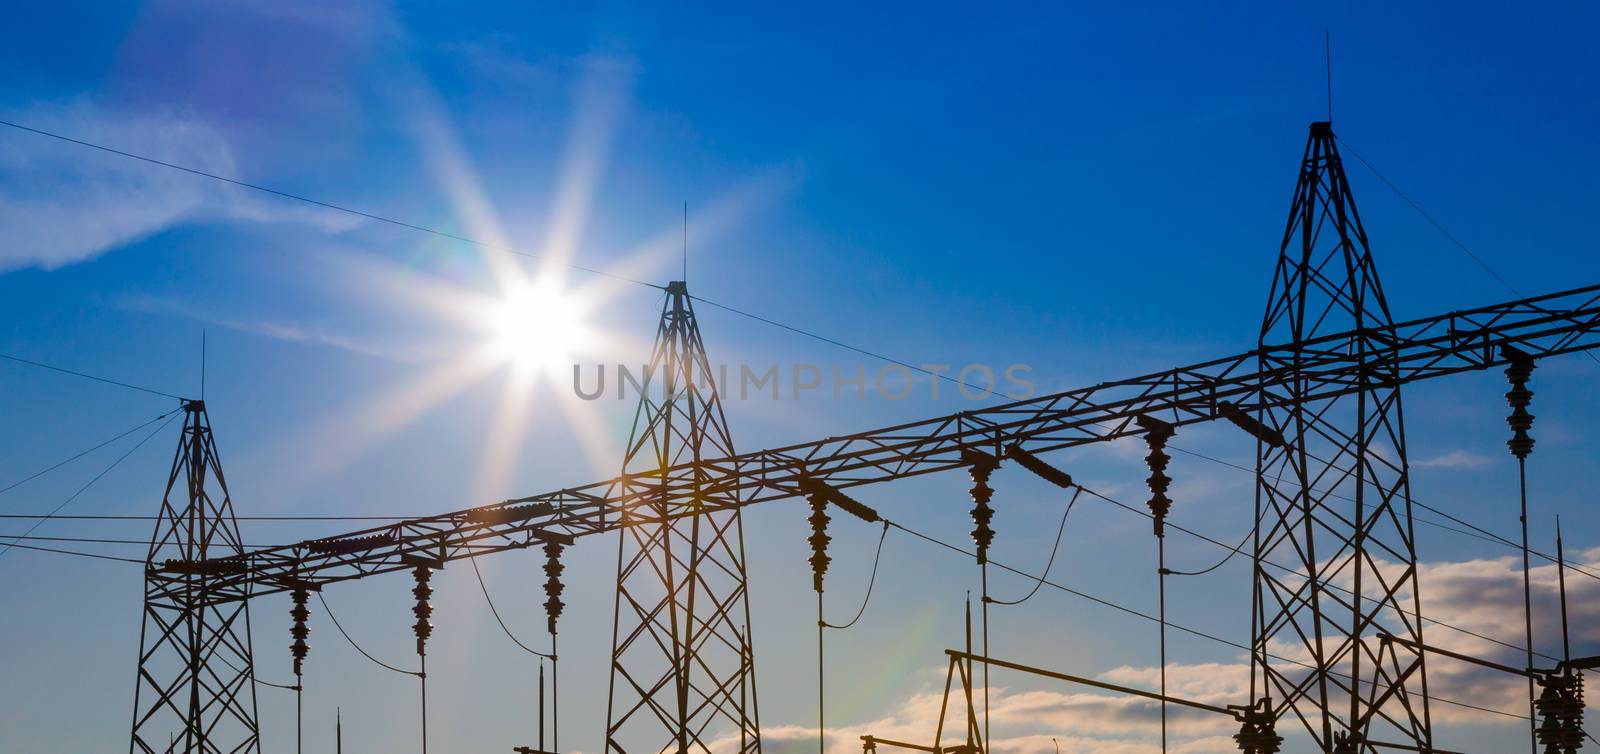 Substation Towers by patrickstock